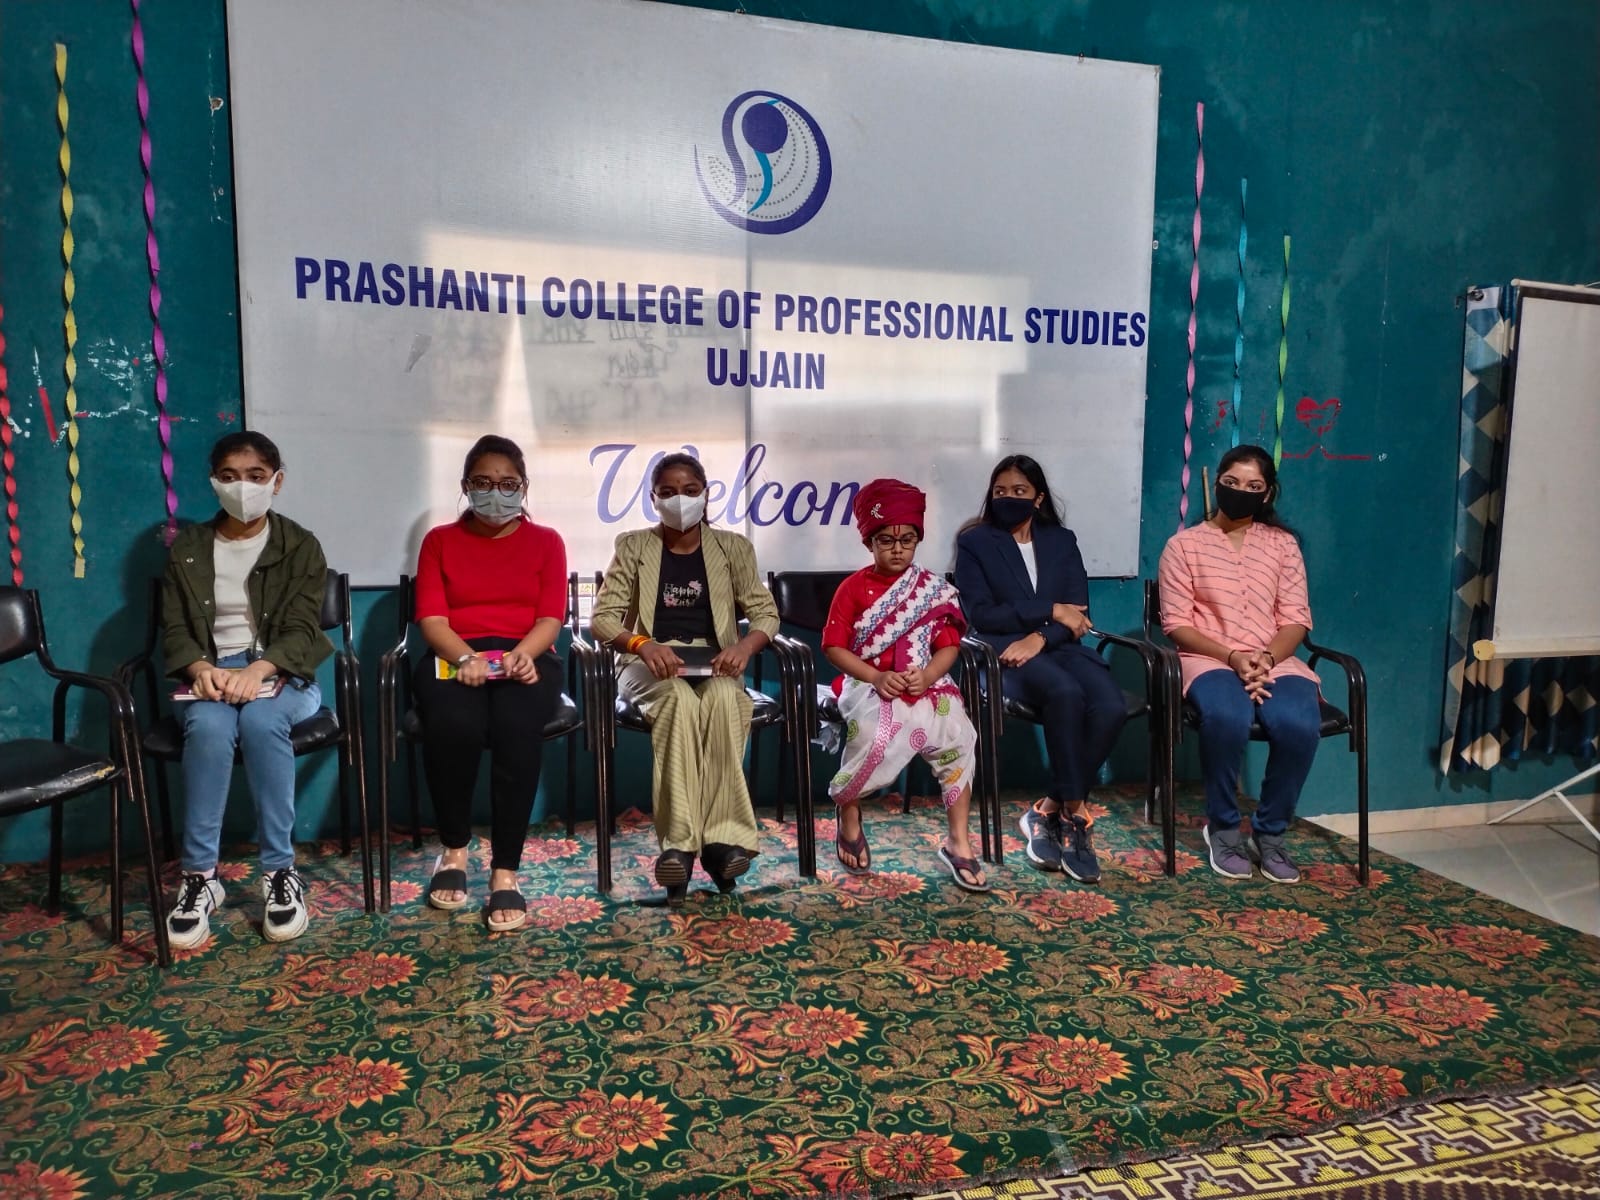 Prashanti Group of Institutes - Where Education is for Life